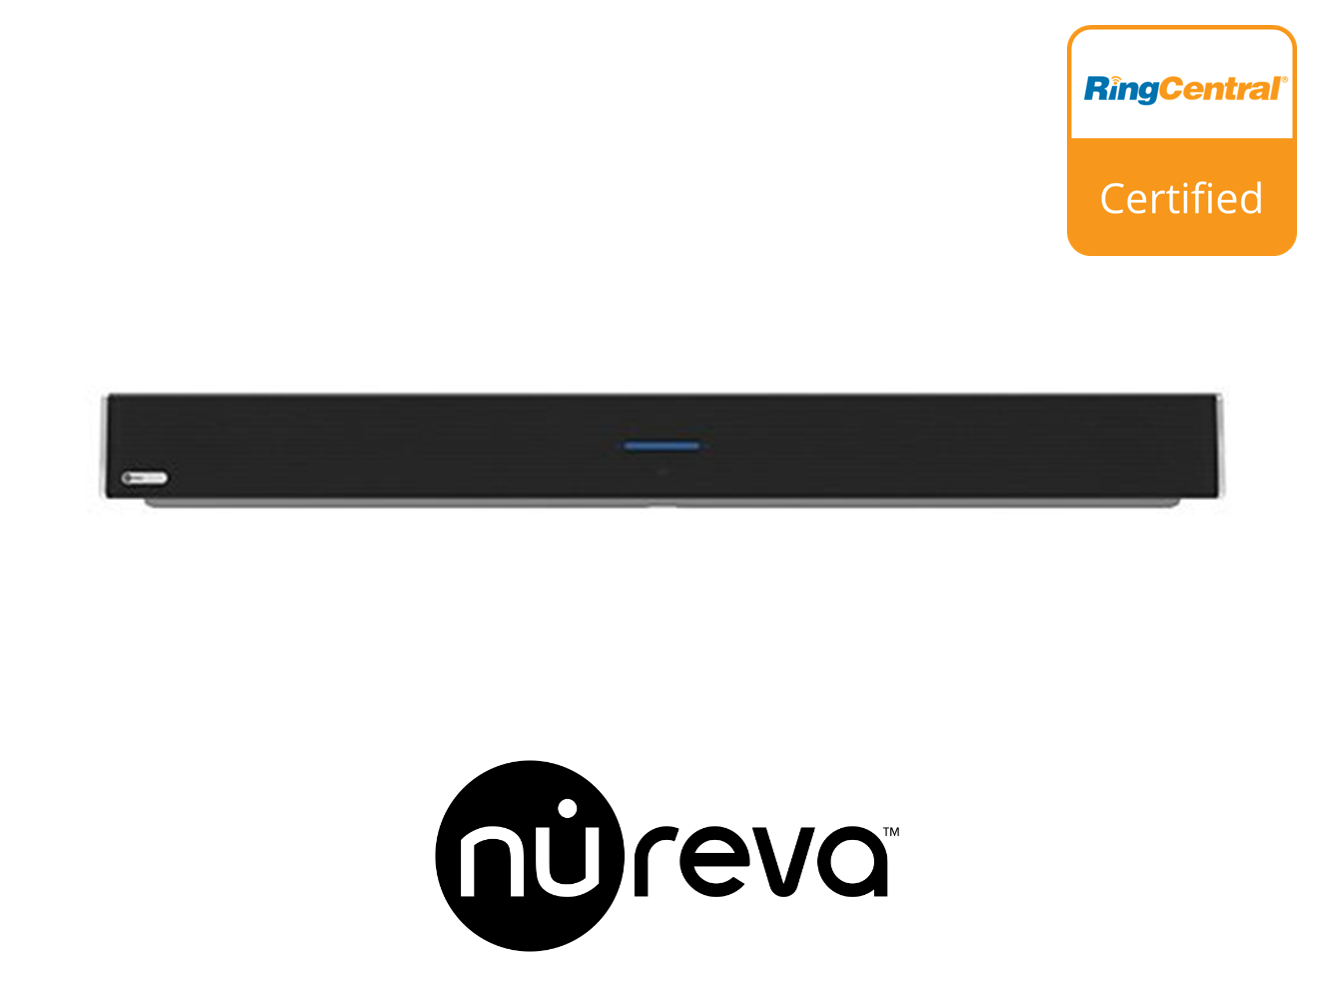 Nureva HDL300 Certified by RingCentral